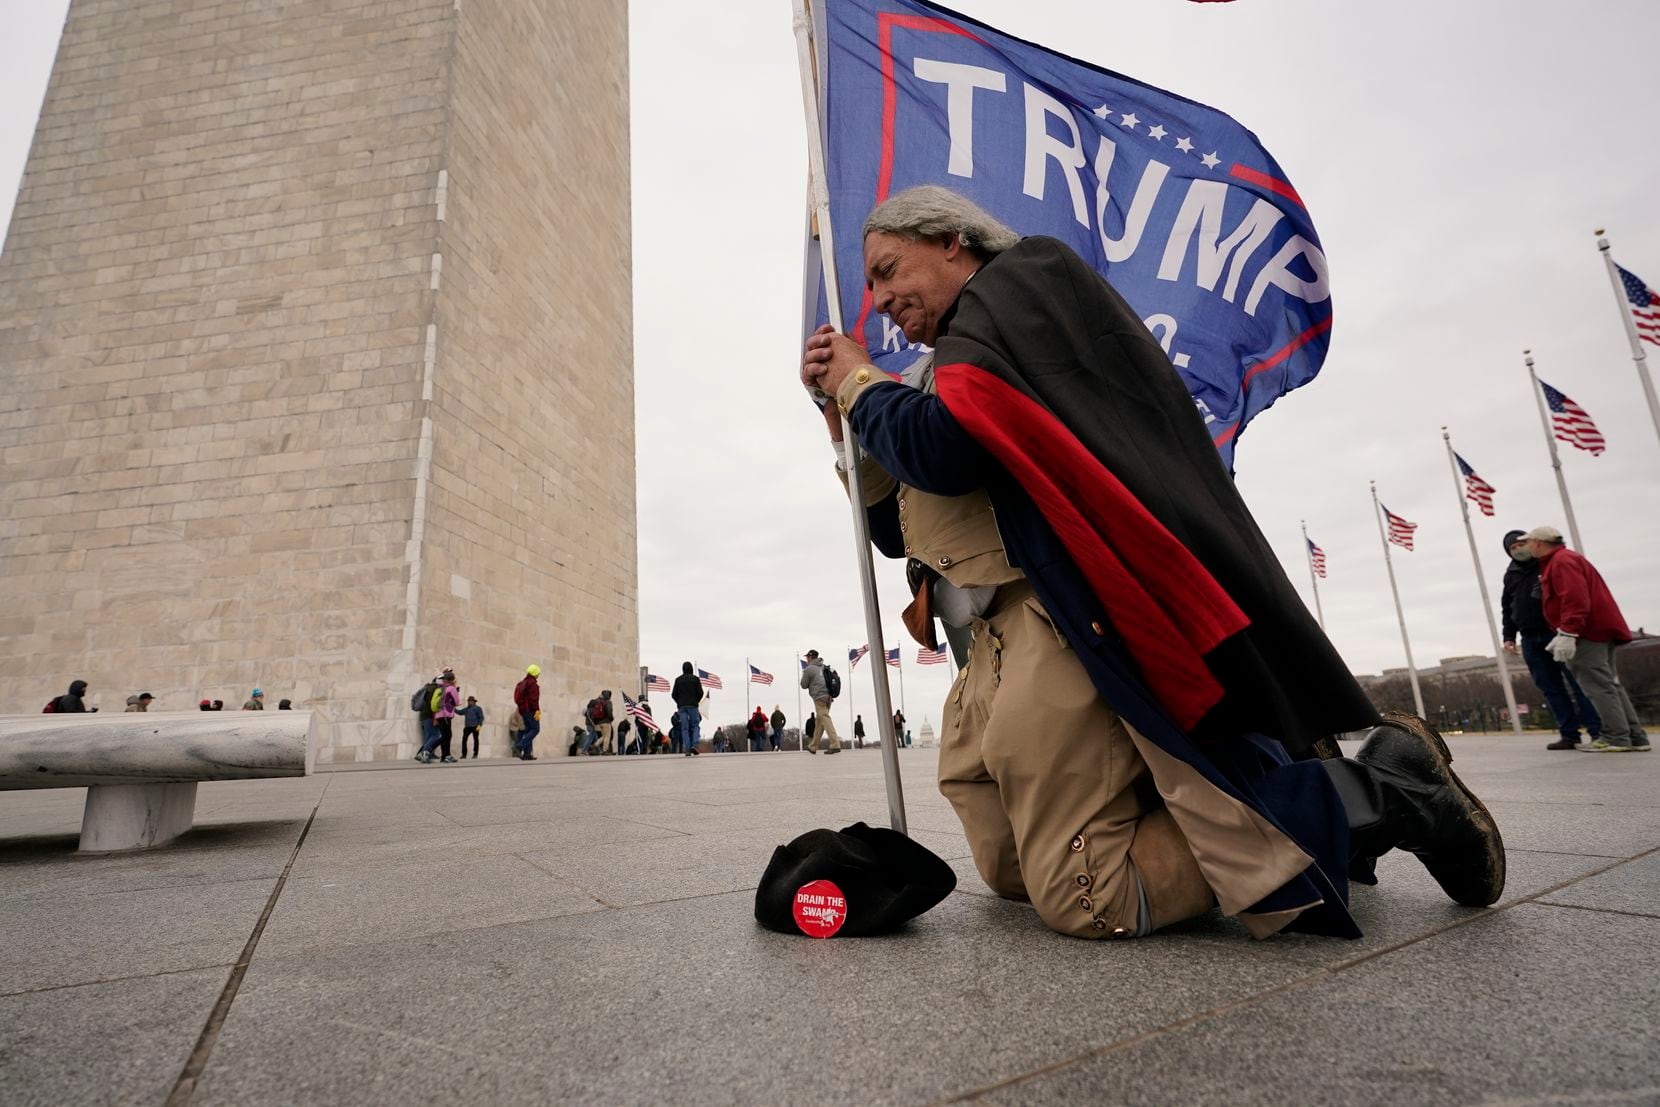 A man dressed as George Washington kneels and prays near the Washington Monument with a...